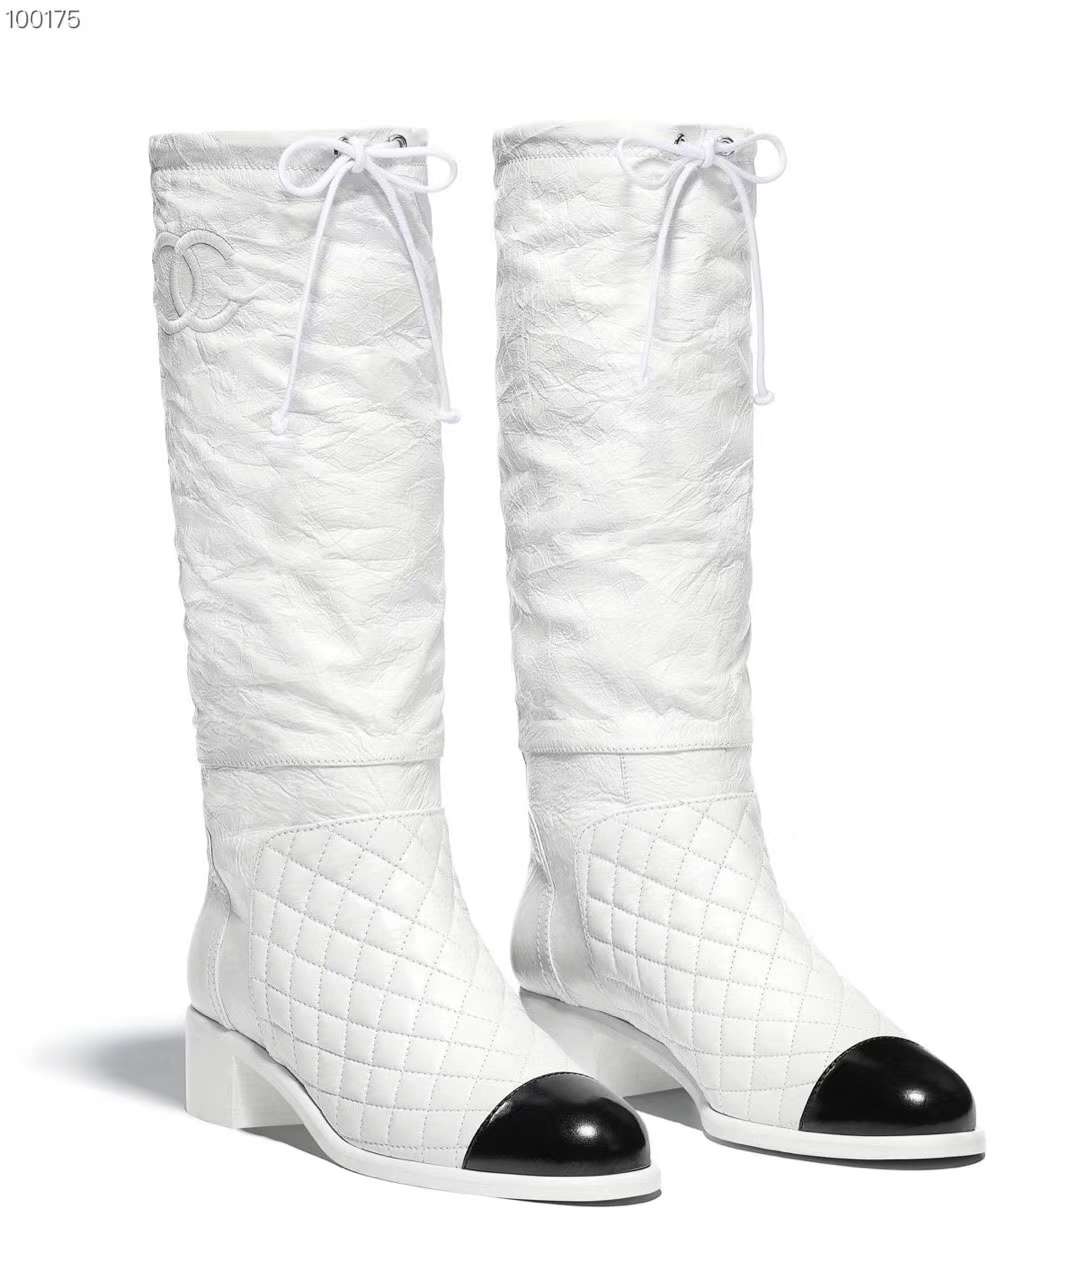 2019 NEW Chanel Real leather shoes Chanel 100175 white - Click Image to Close